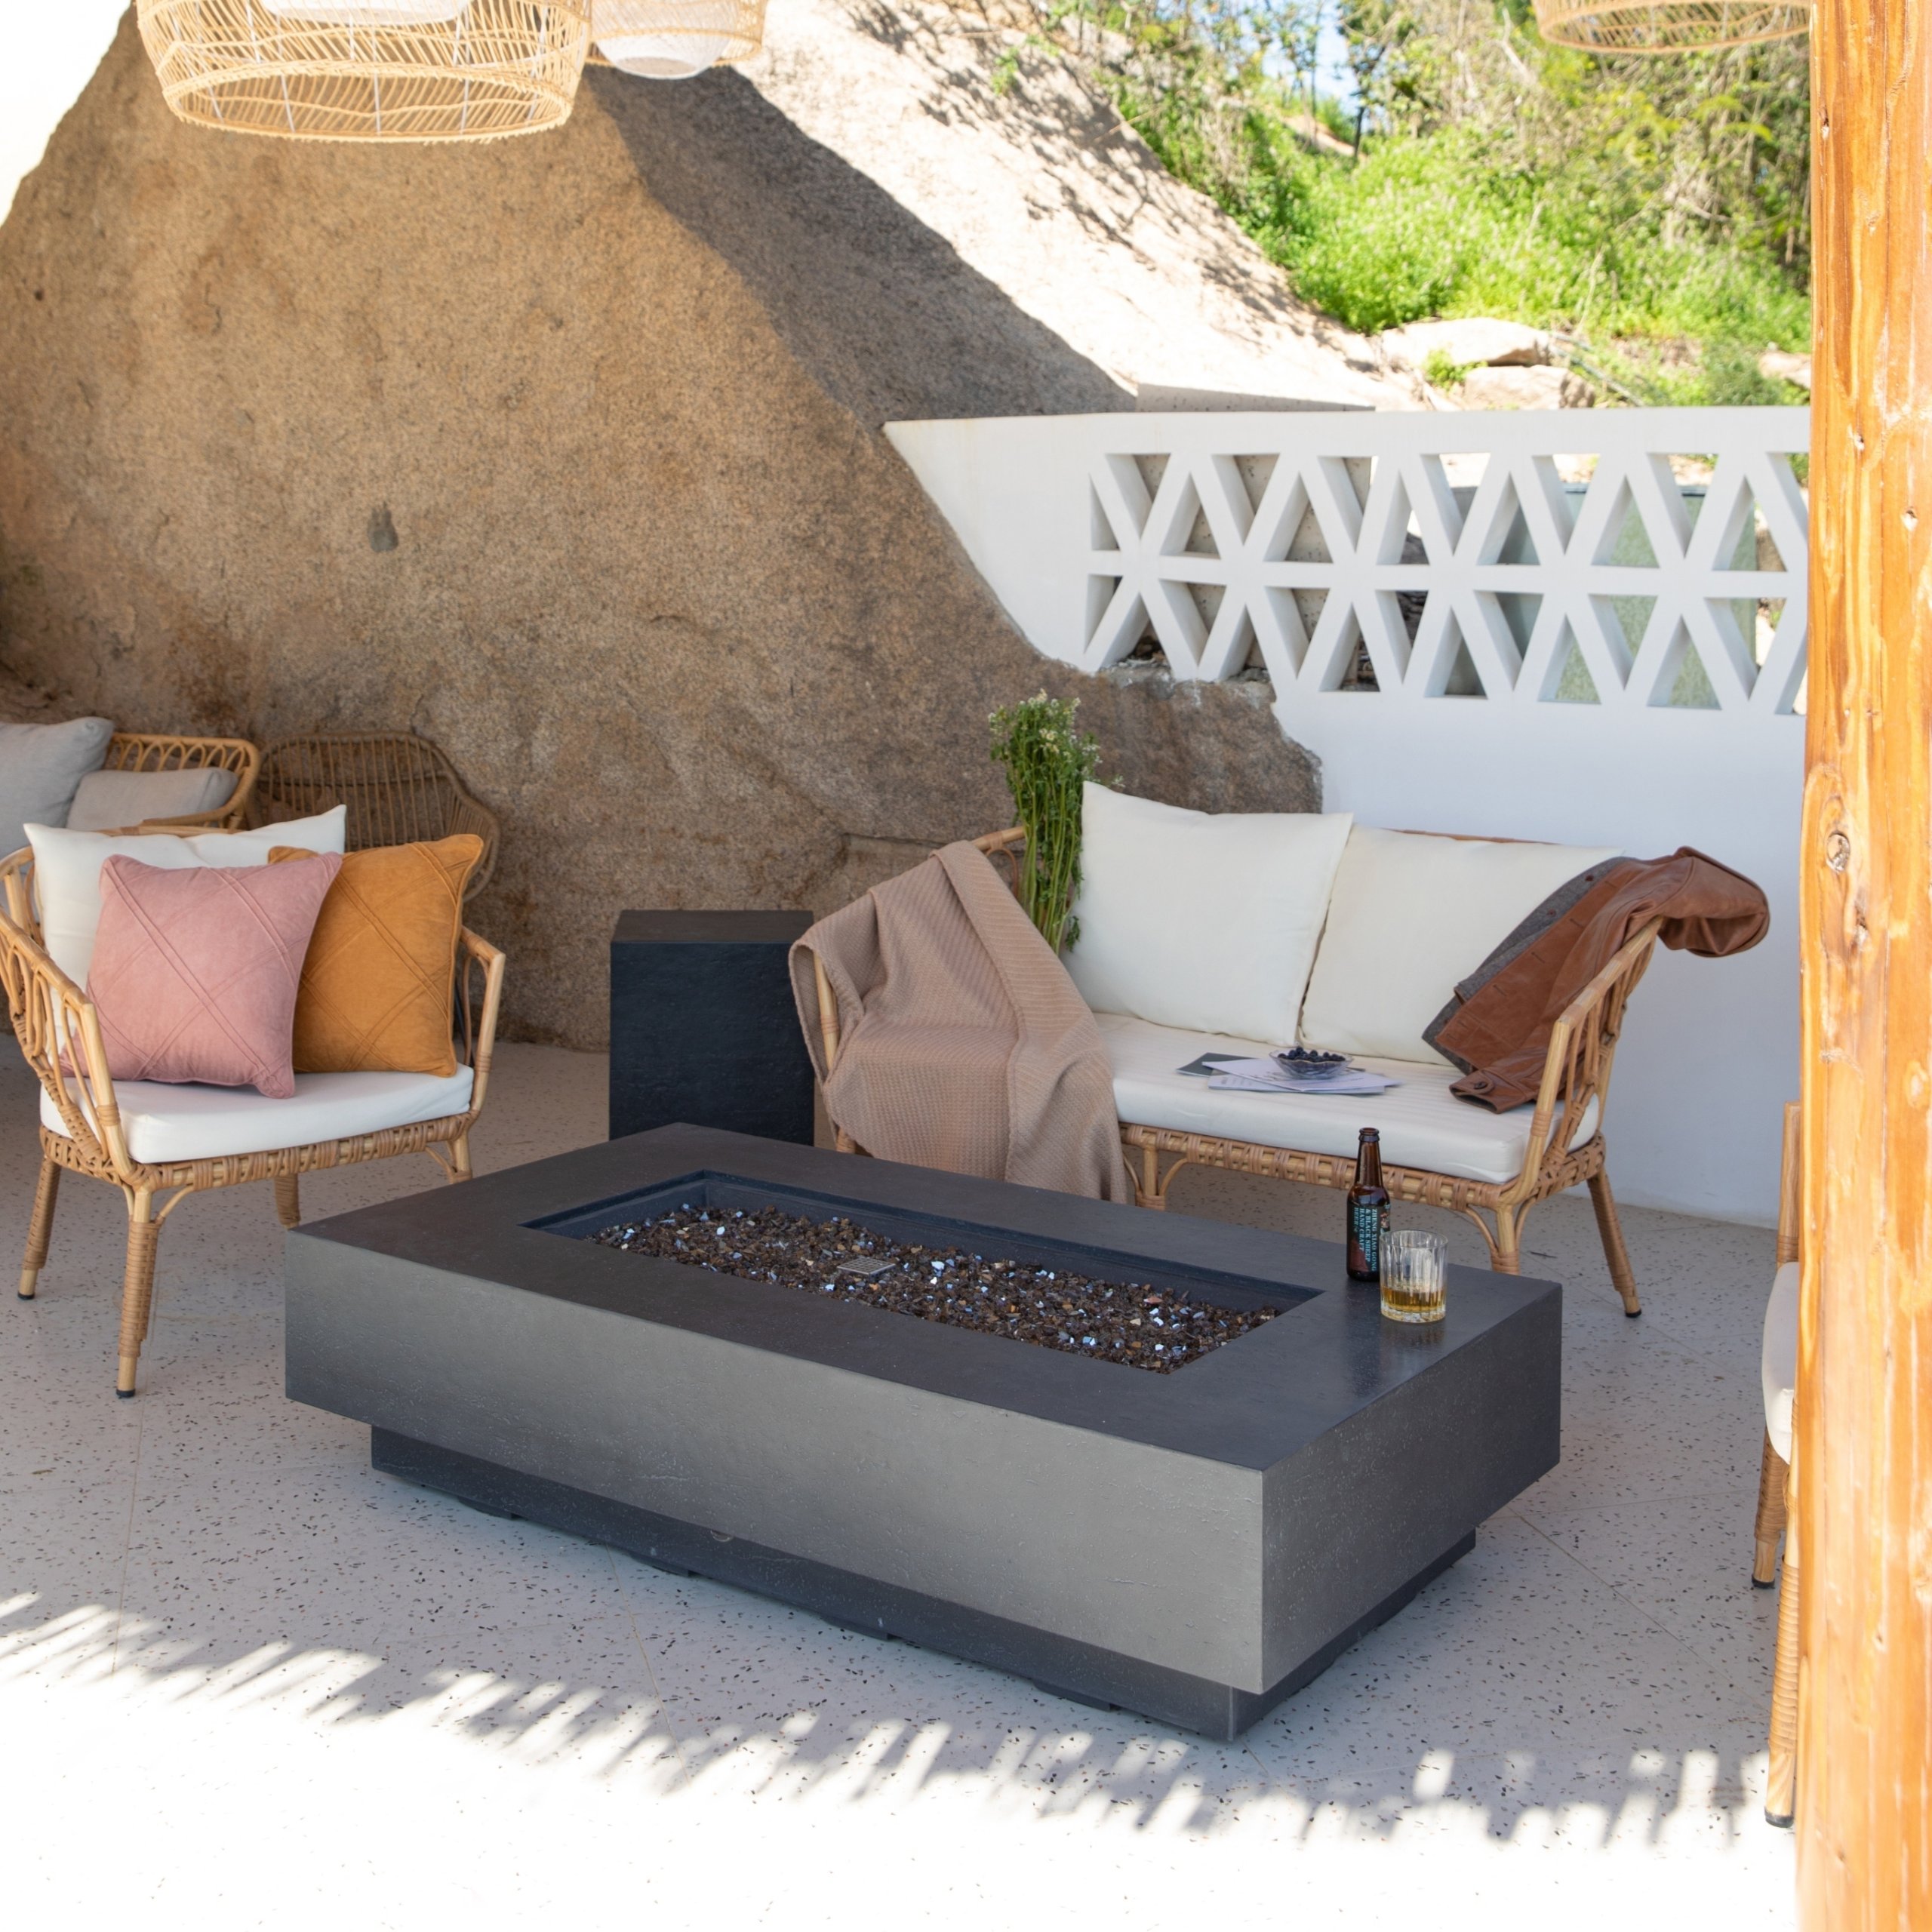 Positano firepit from suns lifestyle